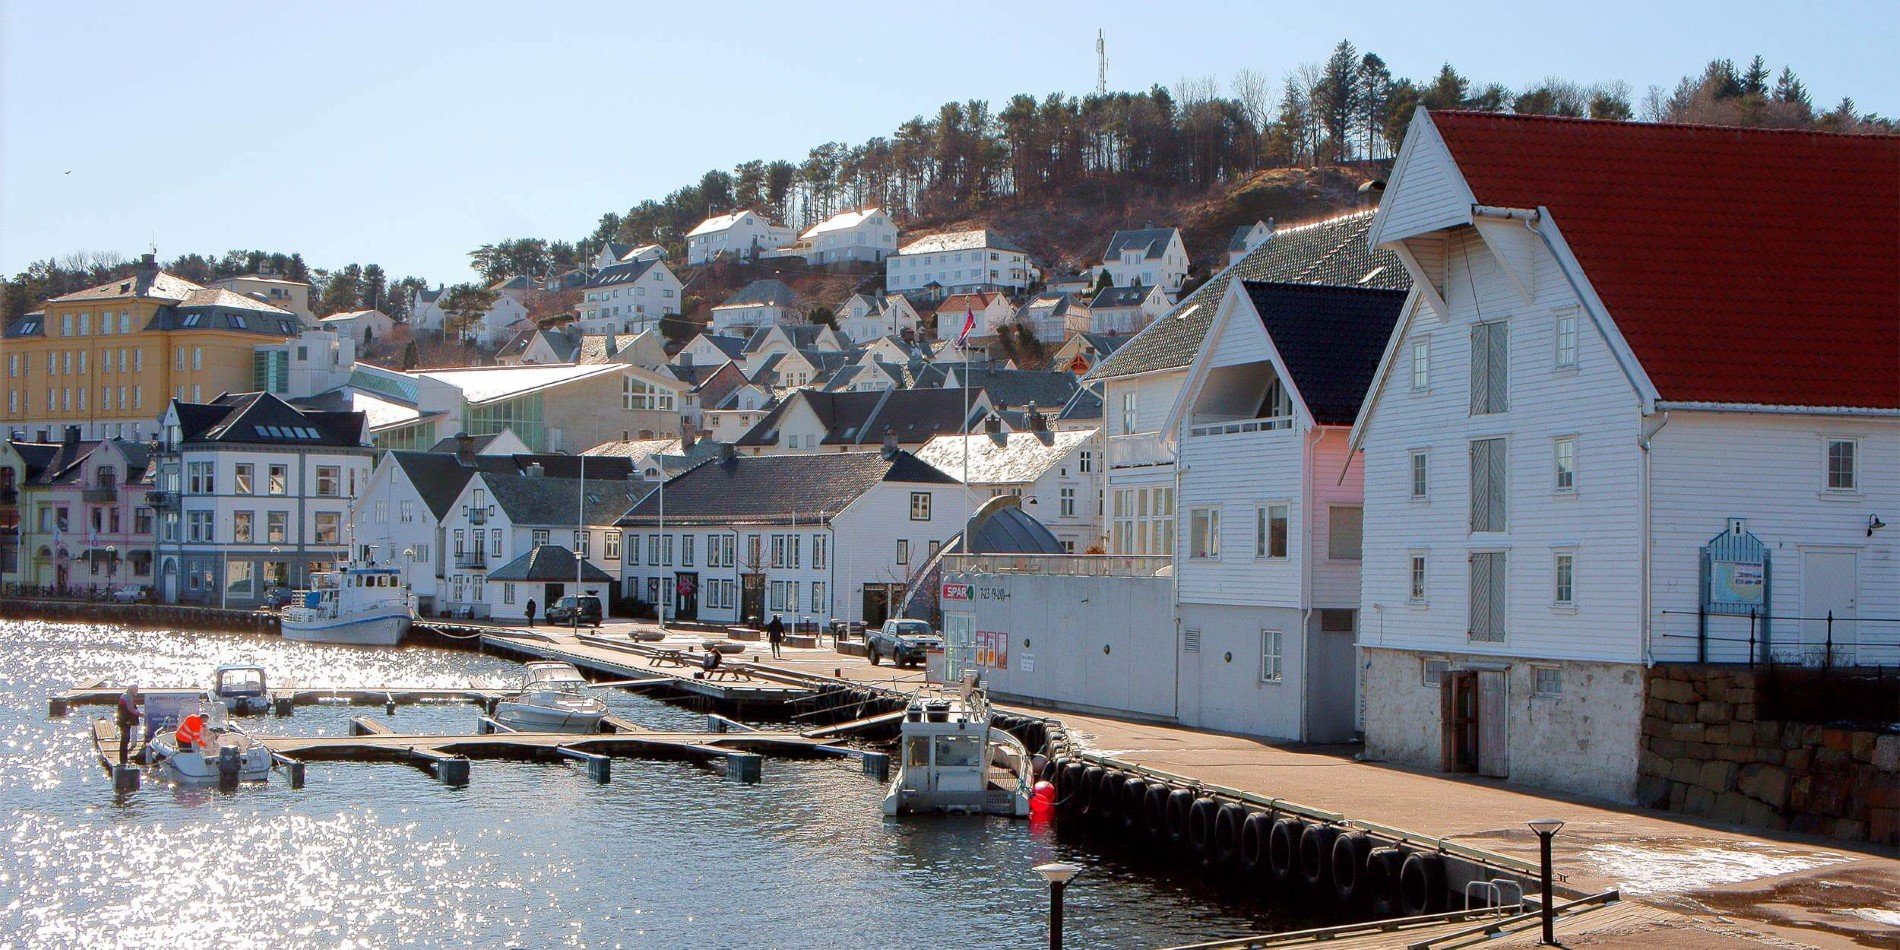 The picturesque, white houses of Farsund